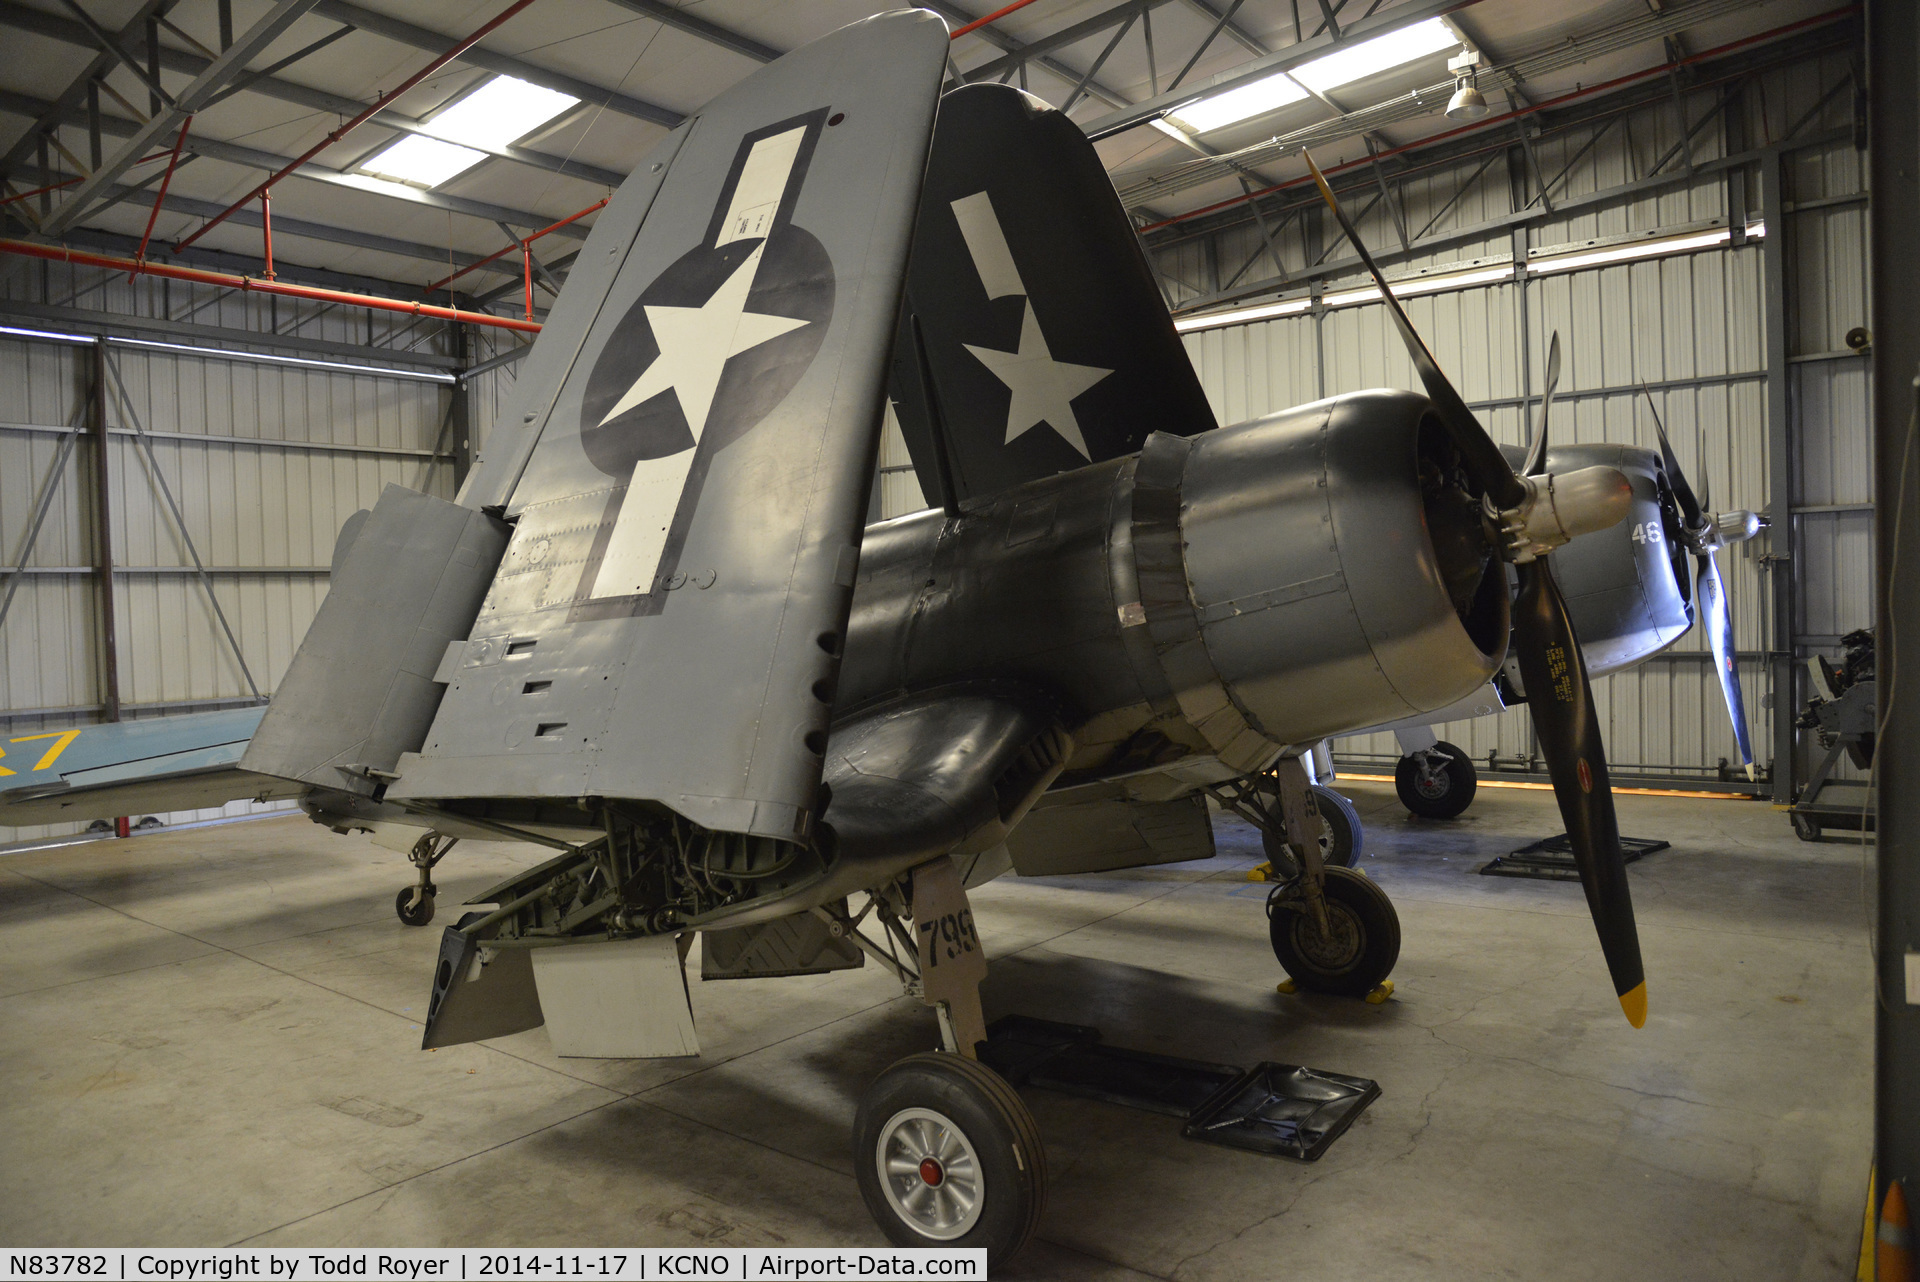 N83782, 1942 Vought F4U-1 Corsair C/N 3884 (Bu 17799), At the Planes of Fame Chino location